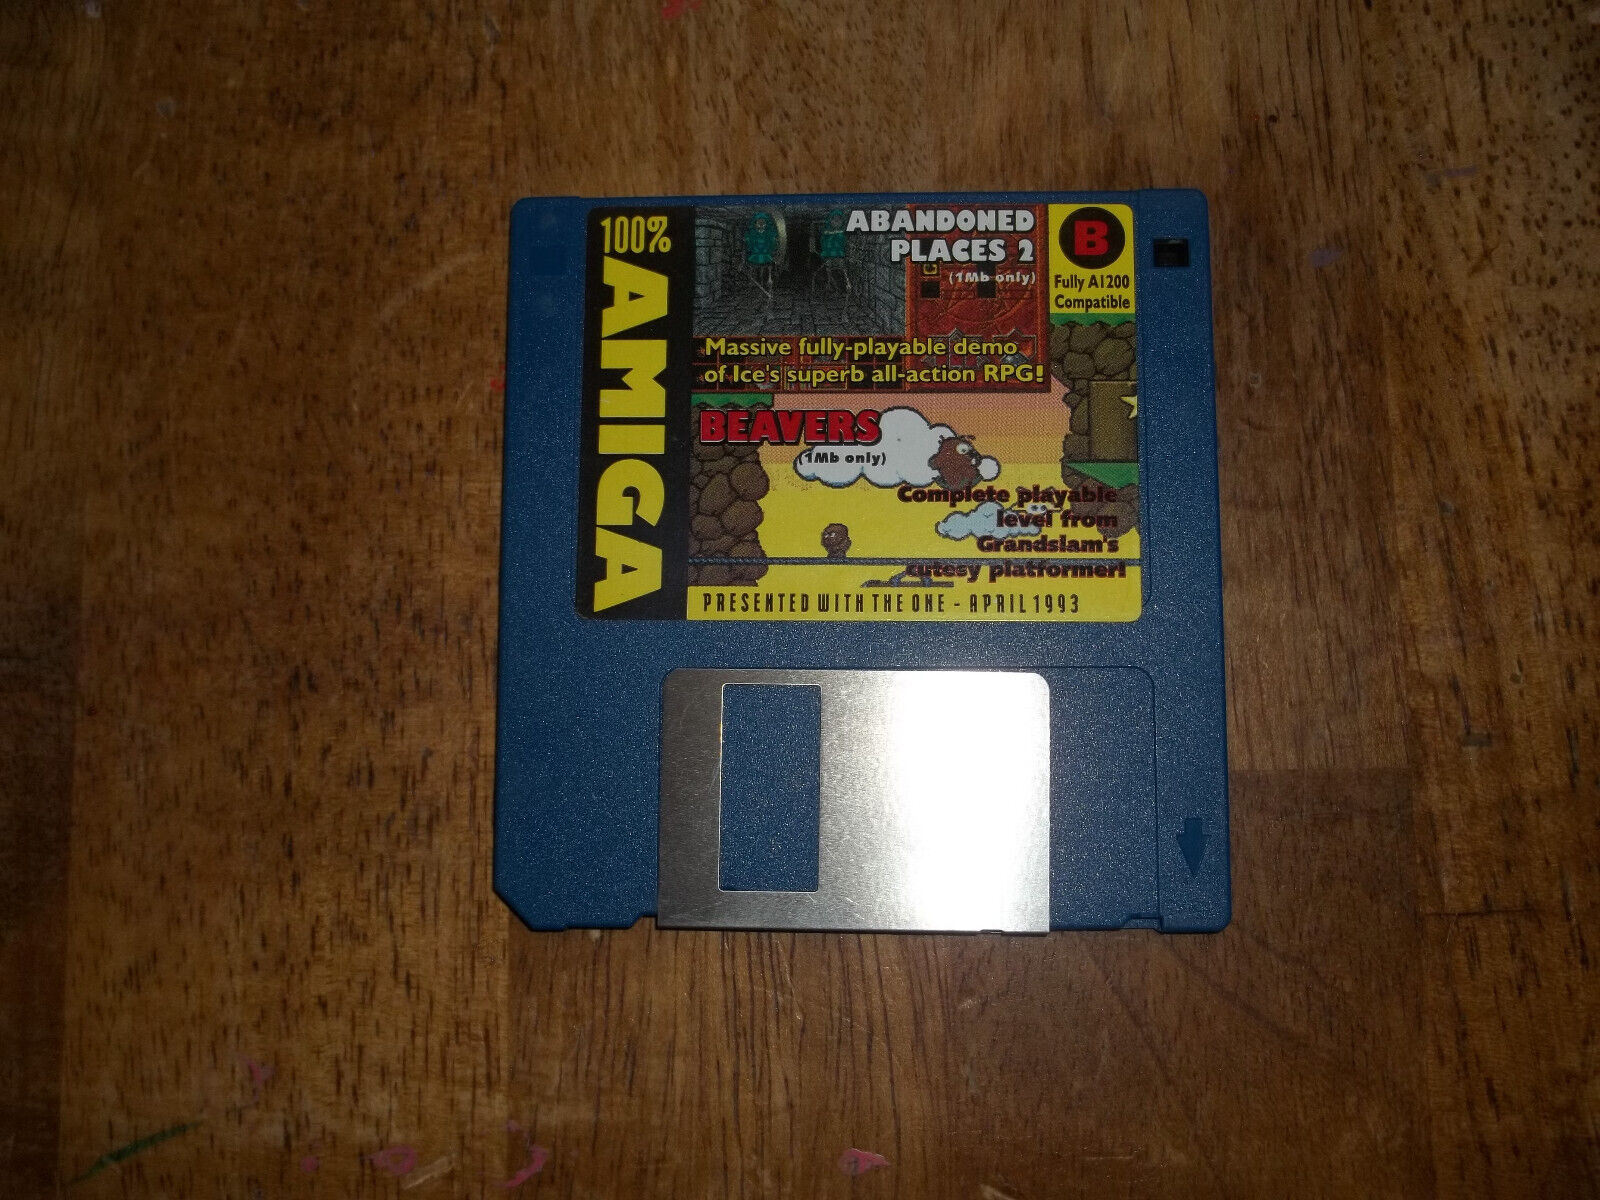 Vintage Commodore Amiga Game Disk - Abandoned Places 2, and Beavers